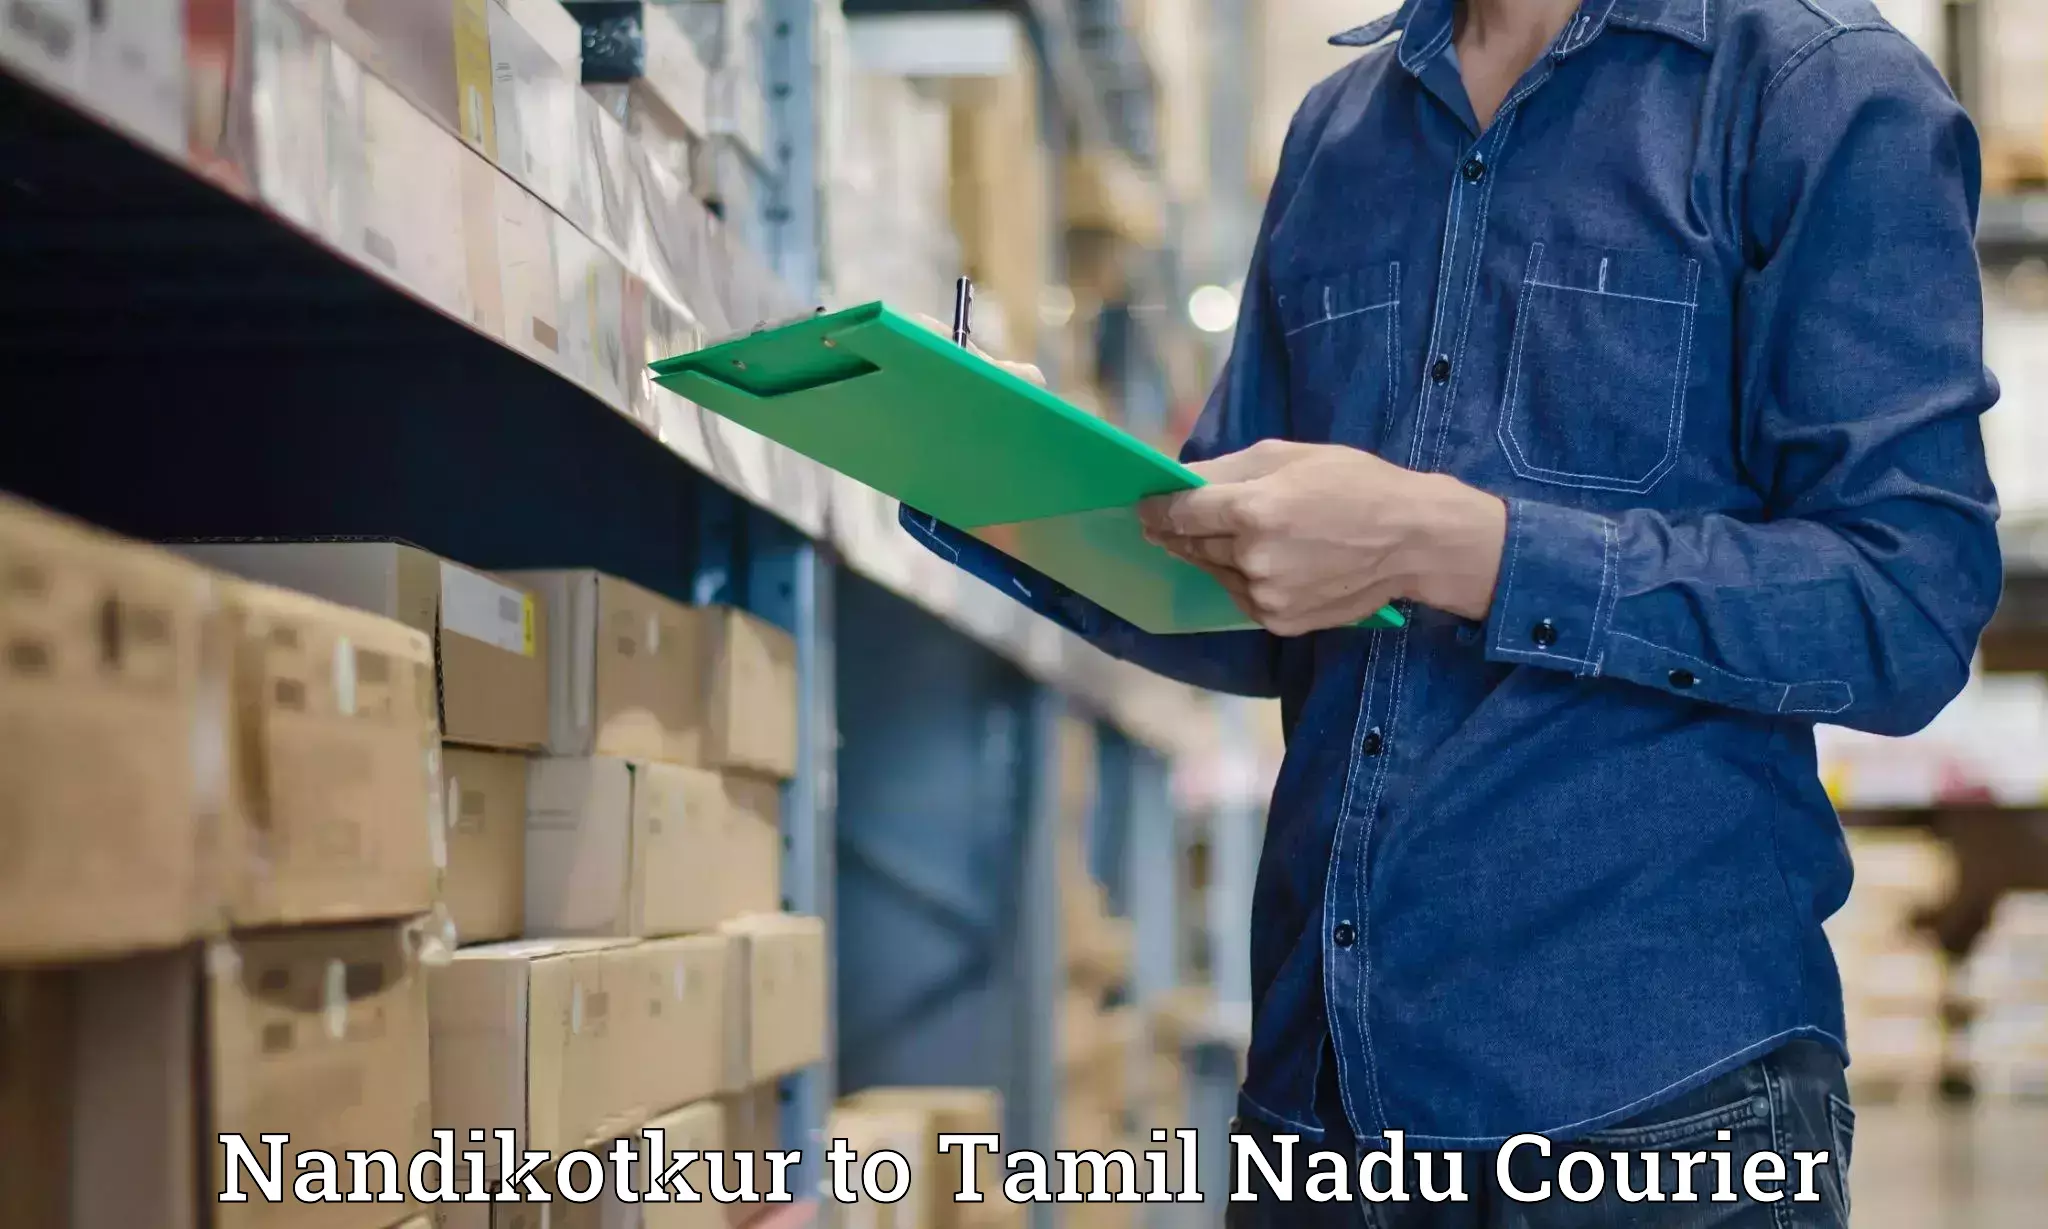 Easy access courier services Nandikotkur to Eral